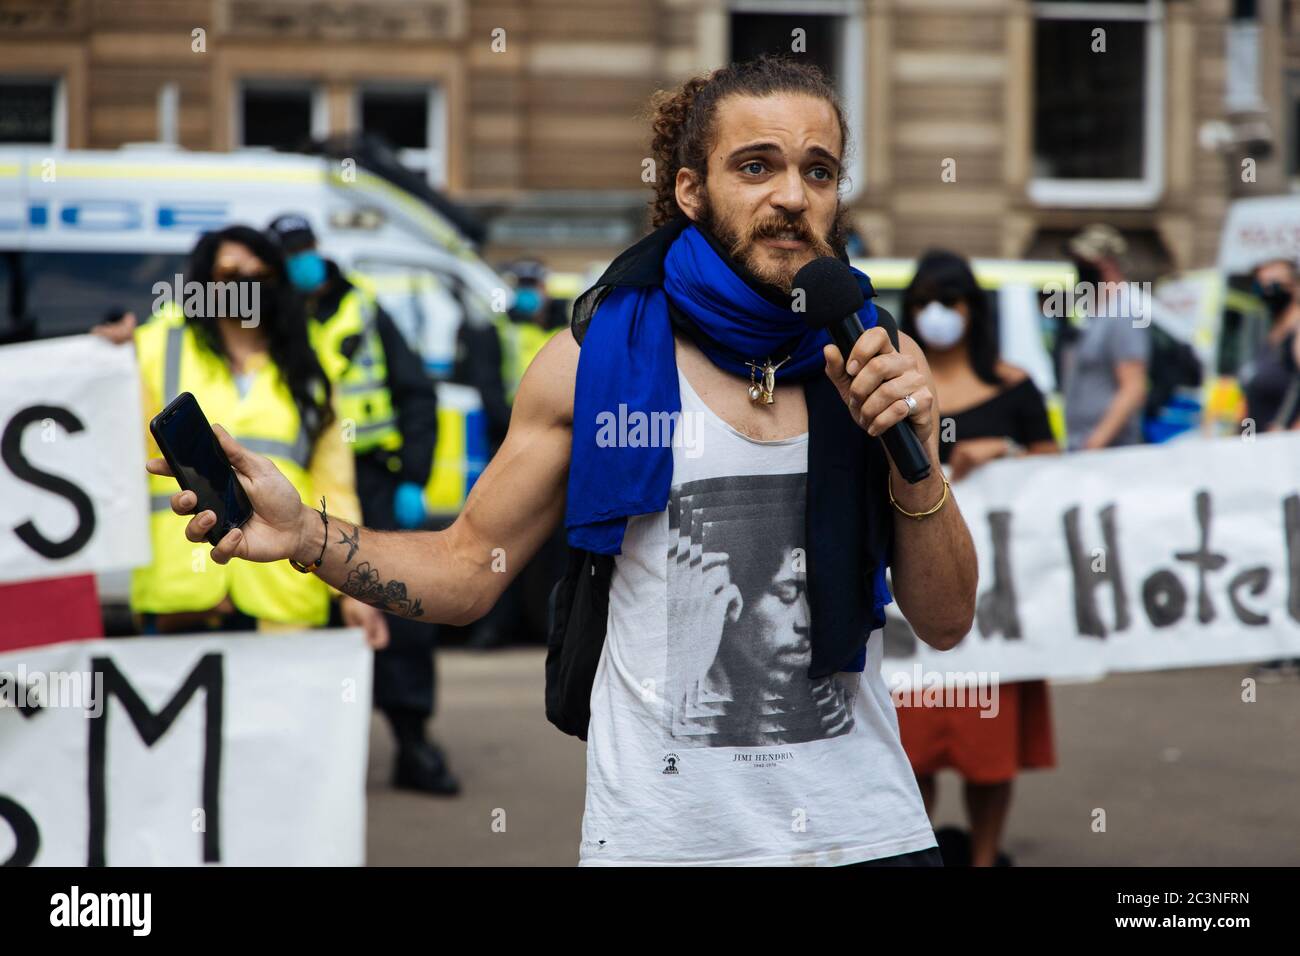 From Anti racism protest in response to violent clashes mid week to a refugee welcome rally. One week prior to stabbing attack in Glasgow. Stock Photo